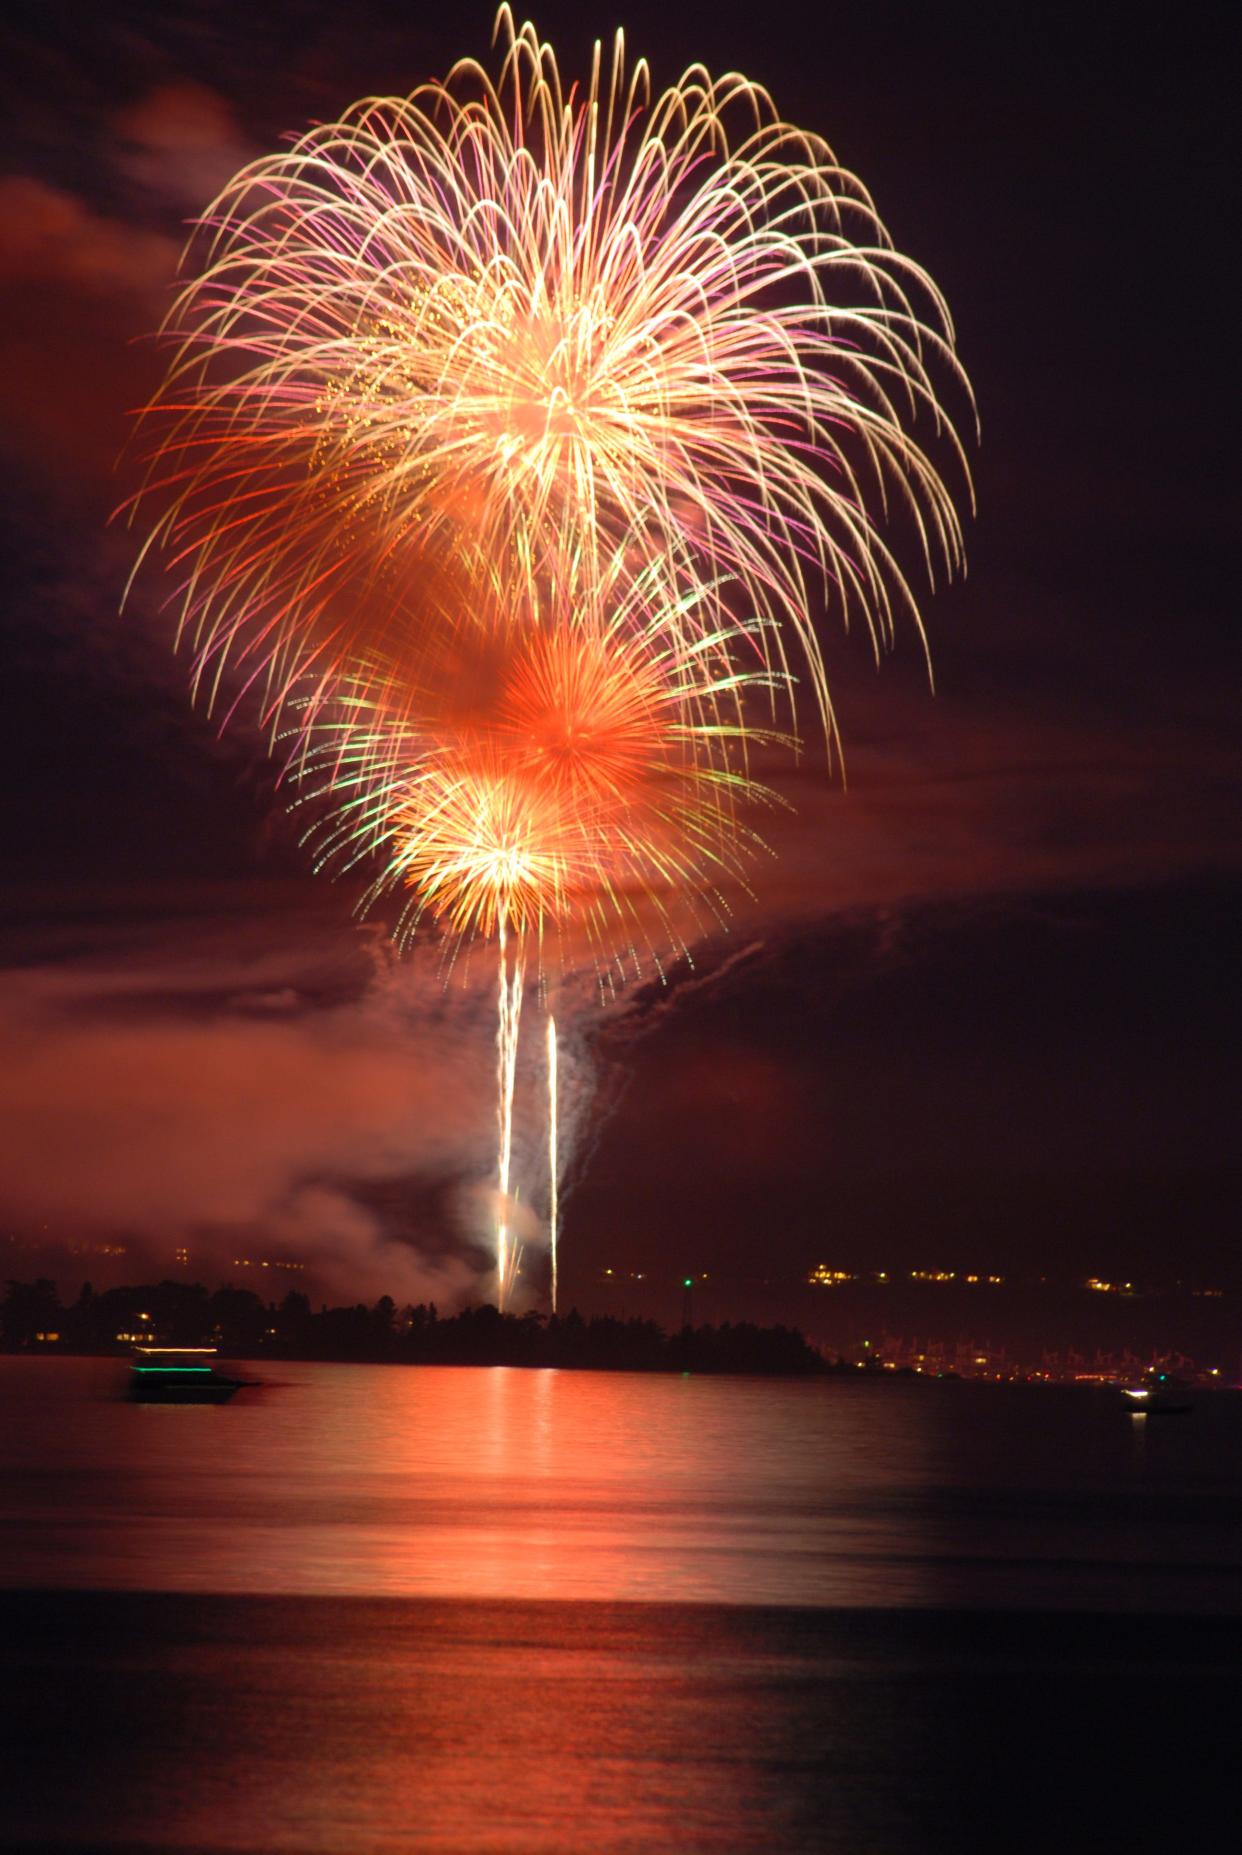 From fireworks displays to downtown parades, here's what you can do to celebrate the Fourth of July in Northern Michigan.